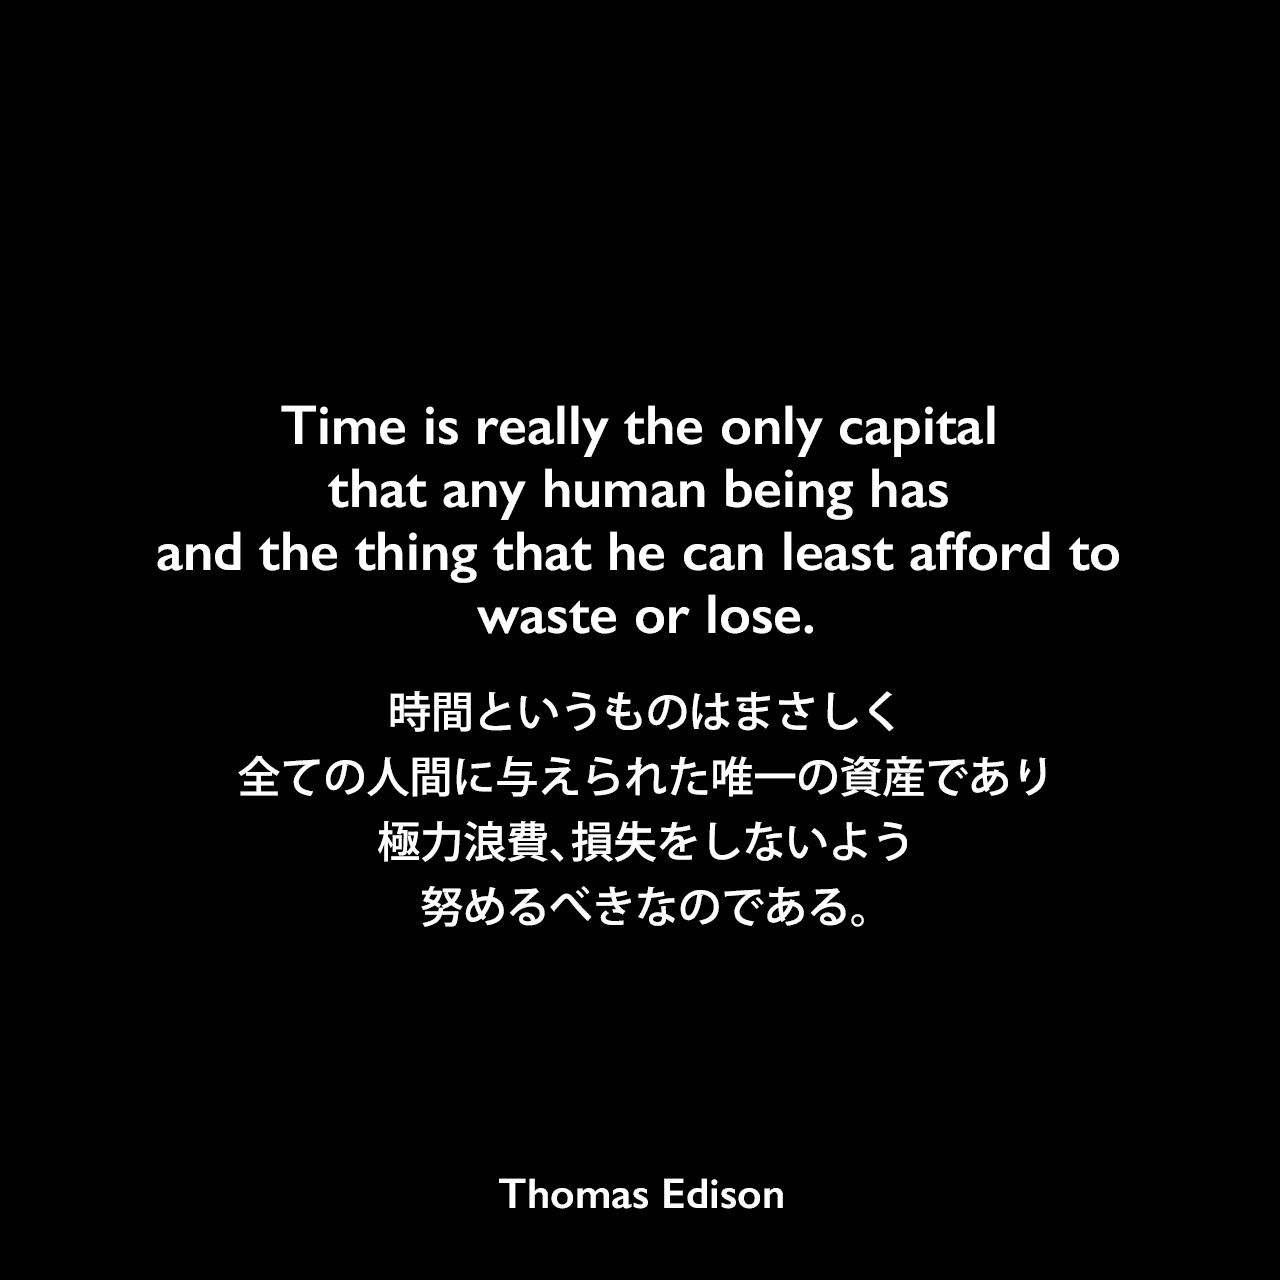 Time is really the only capital that any human being has and the thing that he can least afford to waste or lose.時間というものはまさしく全ての人間に与えられた唯一の資産であり、極力浪費、損失をしないよう努めるべきなのである。